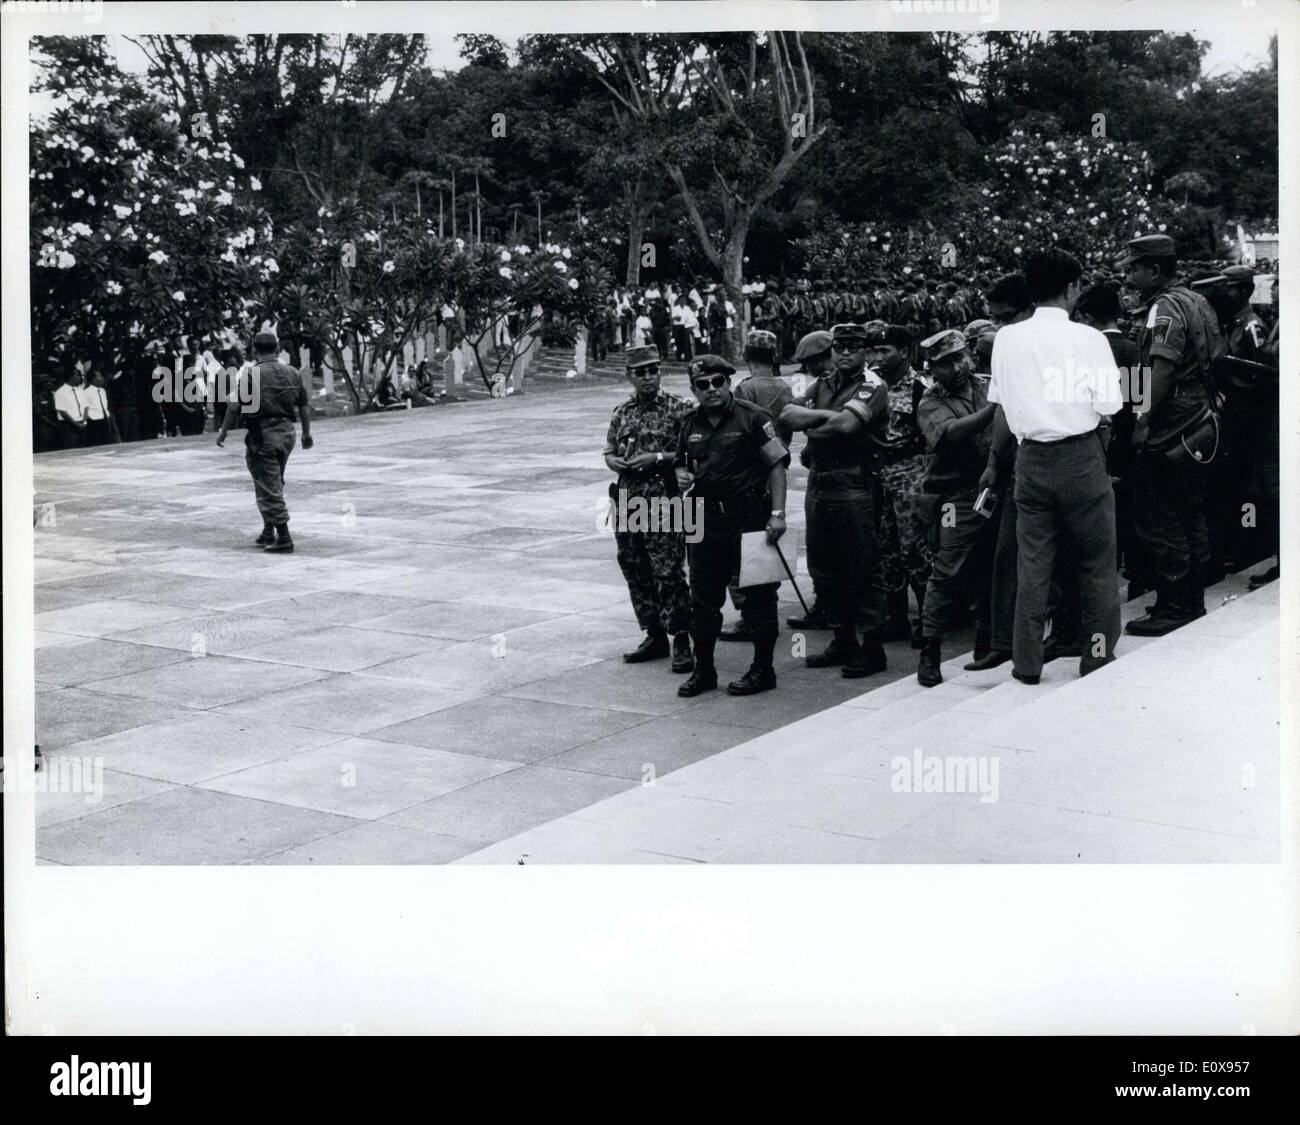 Oct. 05, 1965 - Army Chief of Staff, Maj. Gen. Suharto (left) in jungle suit - and Brig. Gen Sabur, head of Tjakabirawa (Sukarno's body guard unit) at the funeral for 6 generals killed in aborted red coup, Djakarta Indonesia. Sabur, Suakrono's Chief Body Guard ousted by Suharto. Stock Photo